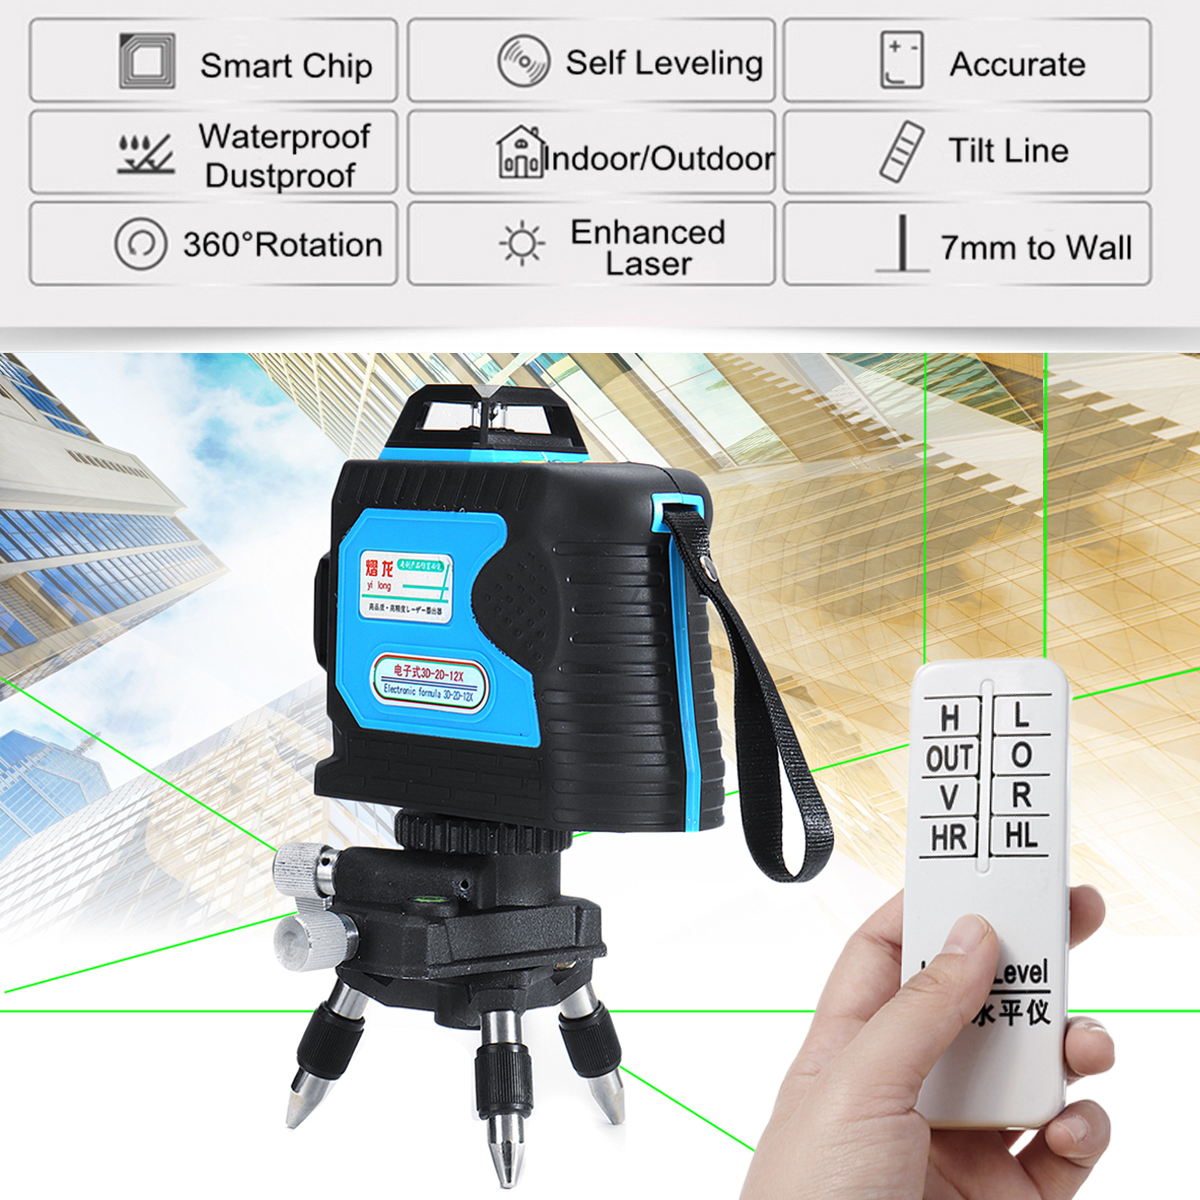 12-Lines-3D-360deg-Waterproof-Level-Precision-Self-Leveling-and--Remote-Control-1636272-4